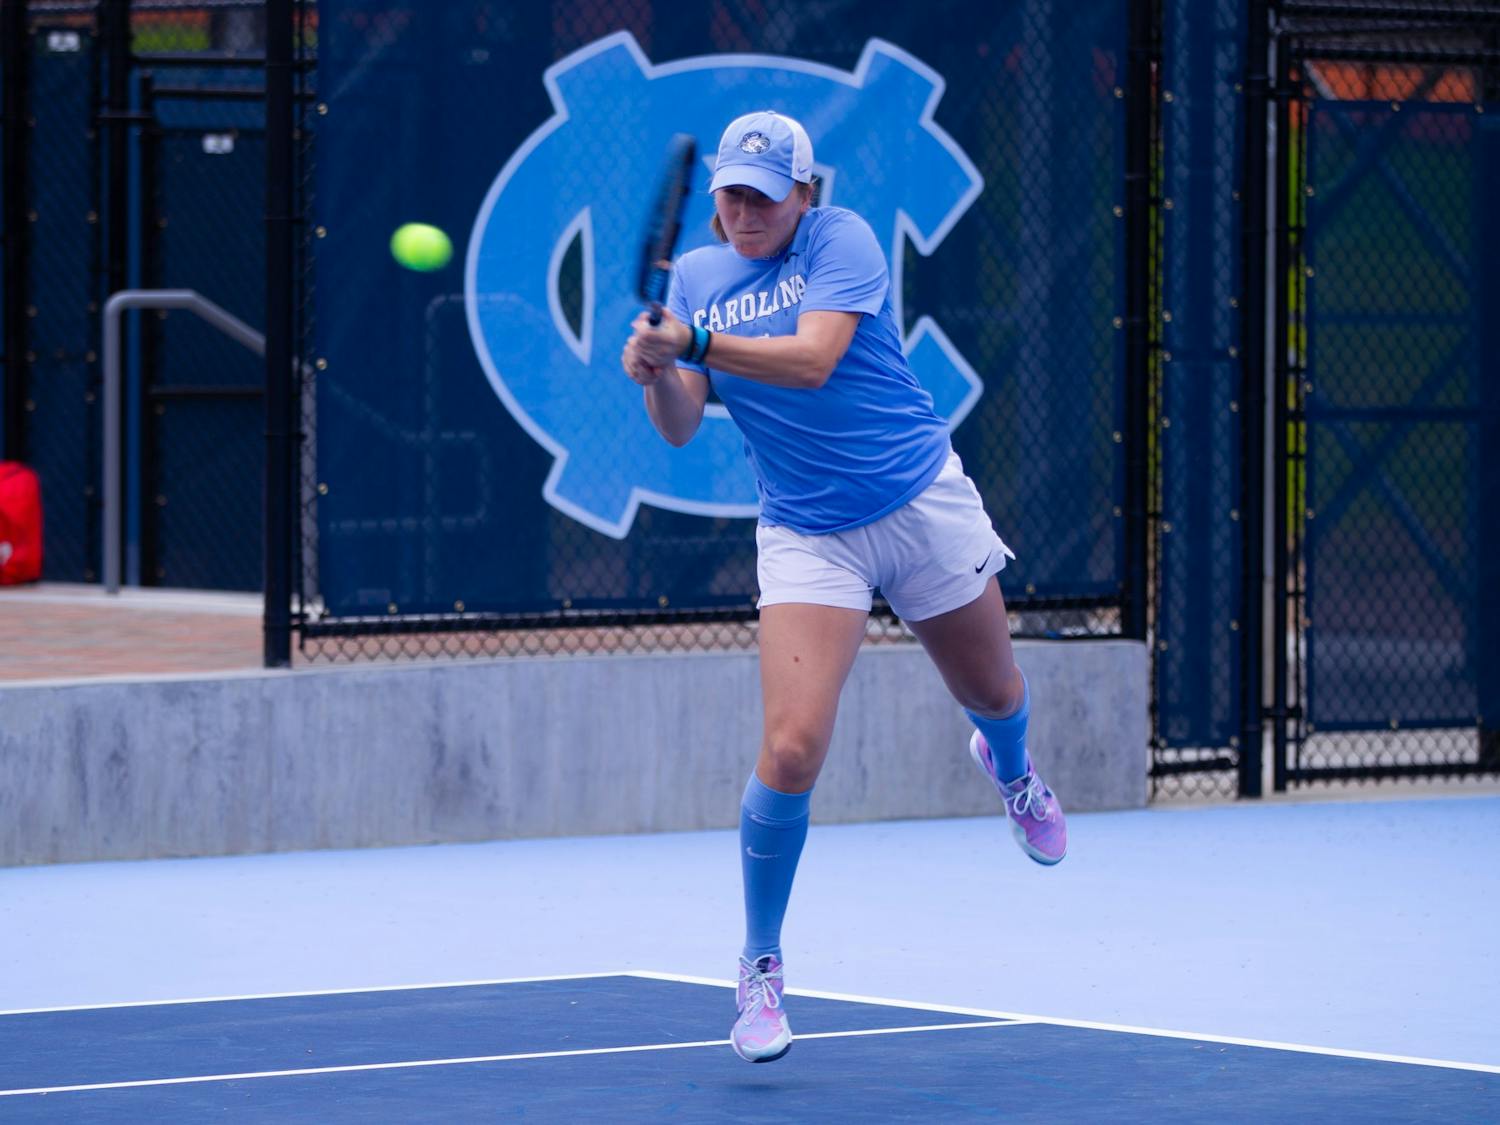 UNC first-year Reese Brantmeier hitting the ball during a match against the Florida State University Seminoles at the Cone-Kenfield Tennis Center on Friday, March 31, 2023. The Tar Heels won 6-1.